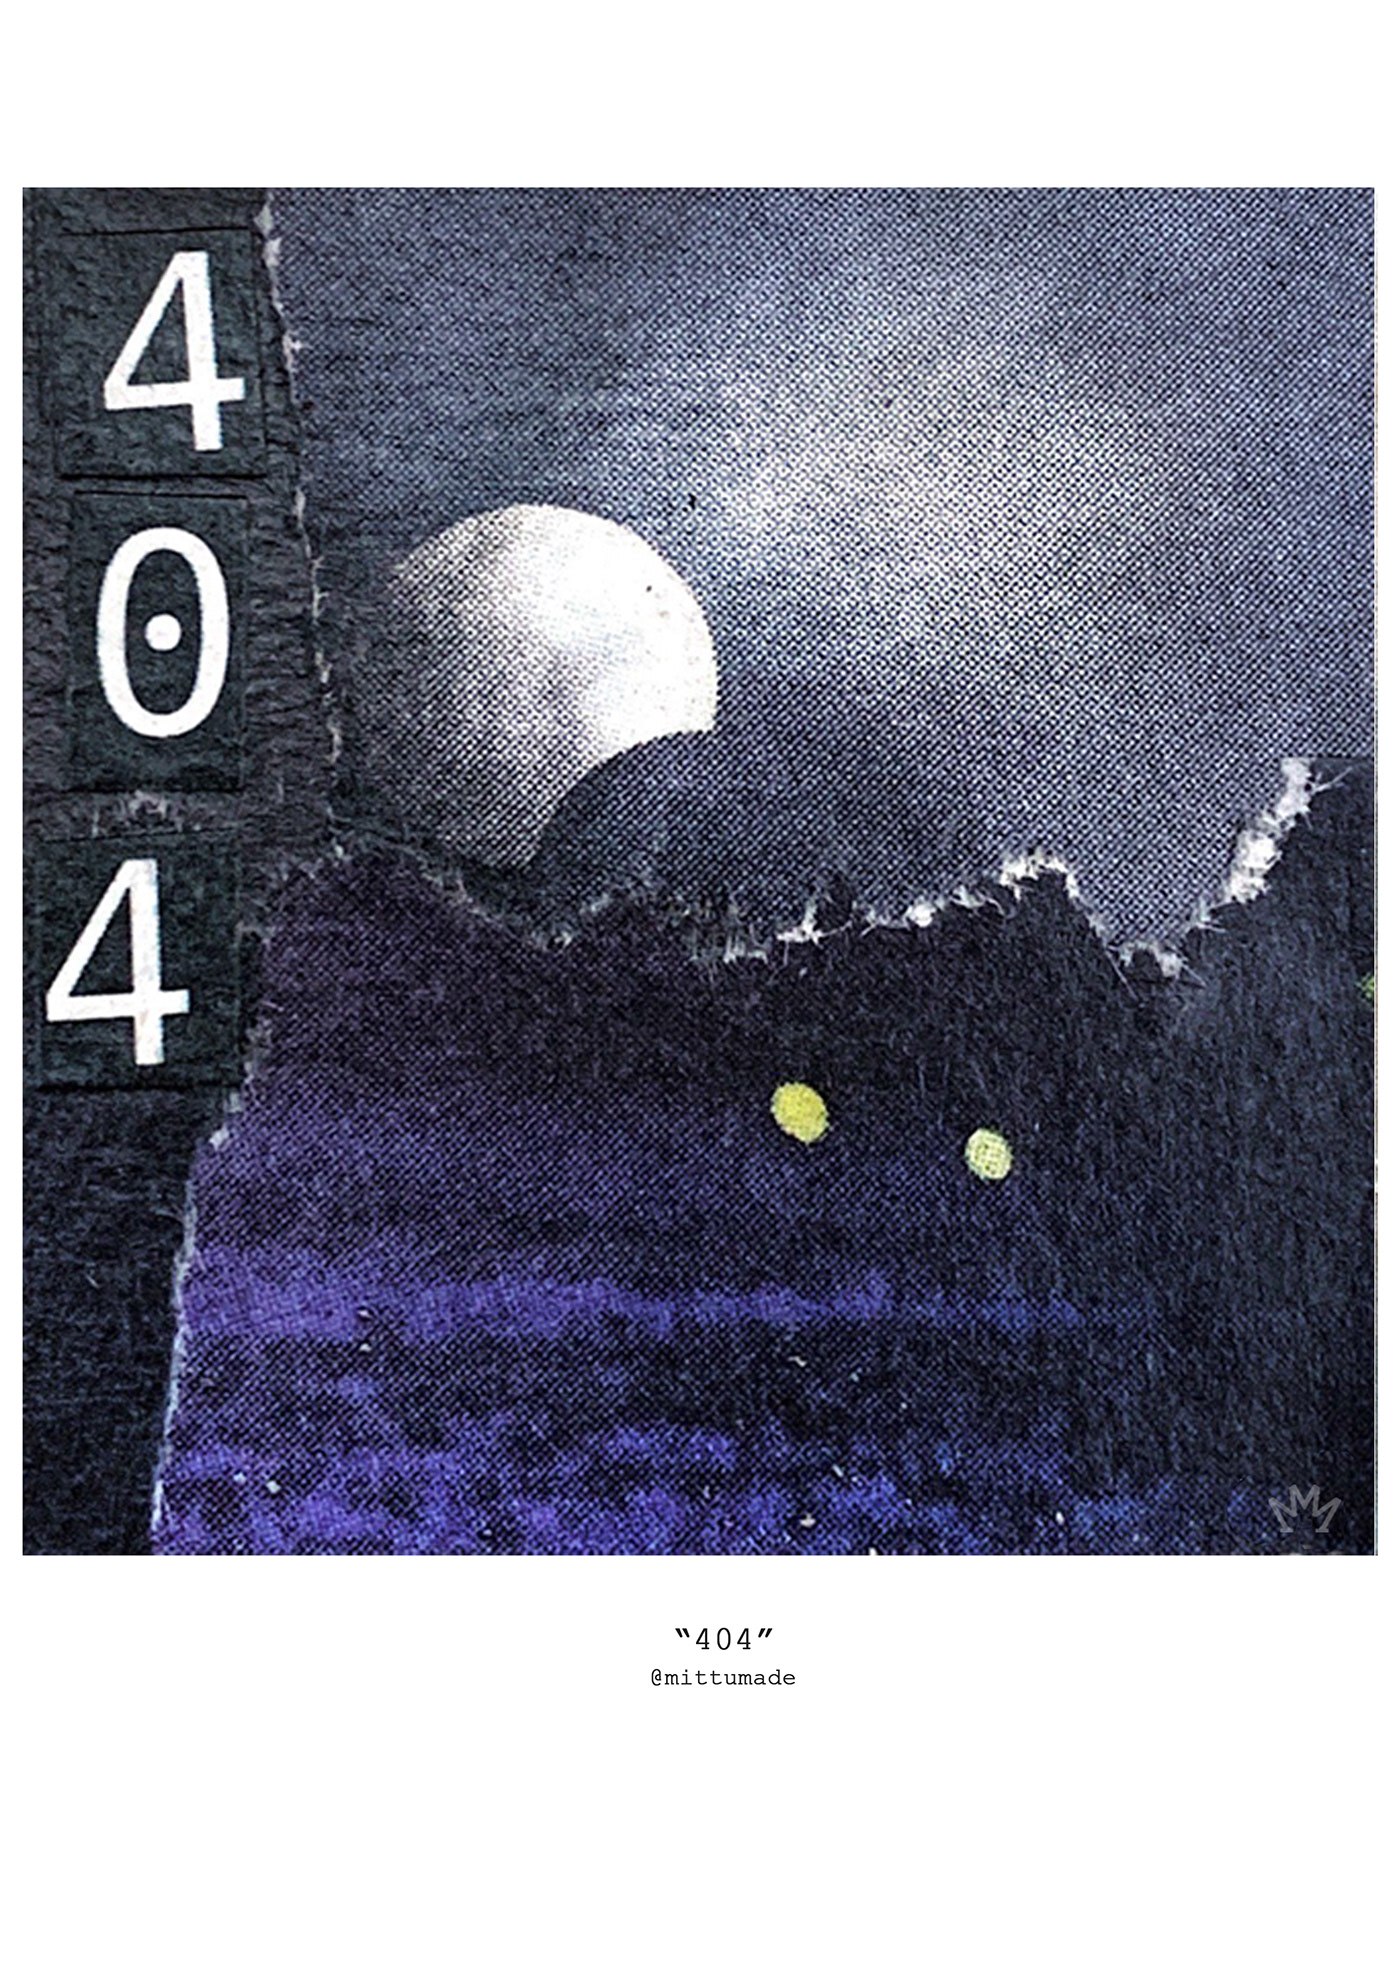 This image has a moon and fireflies with the text 404 on it to depict they are missing